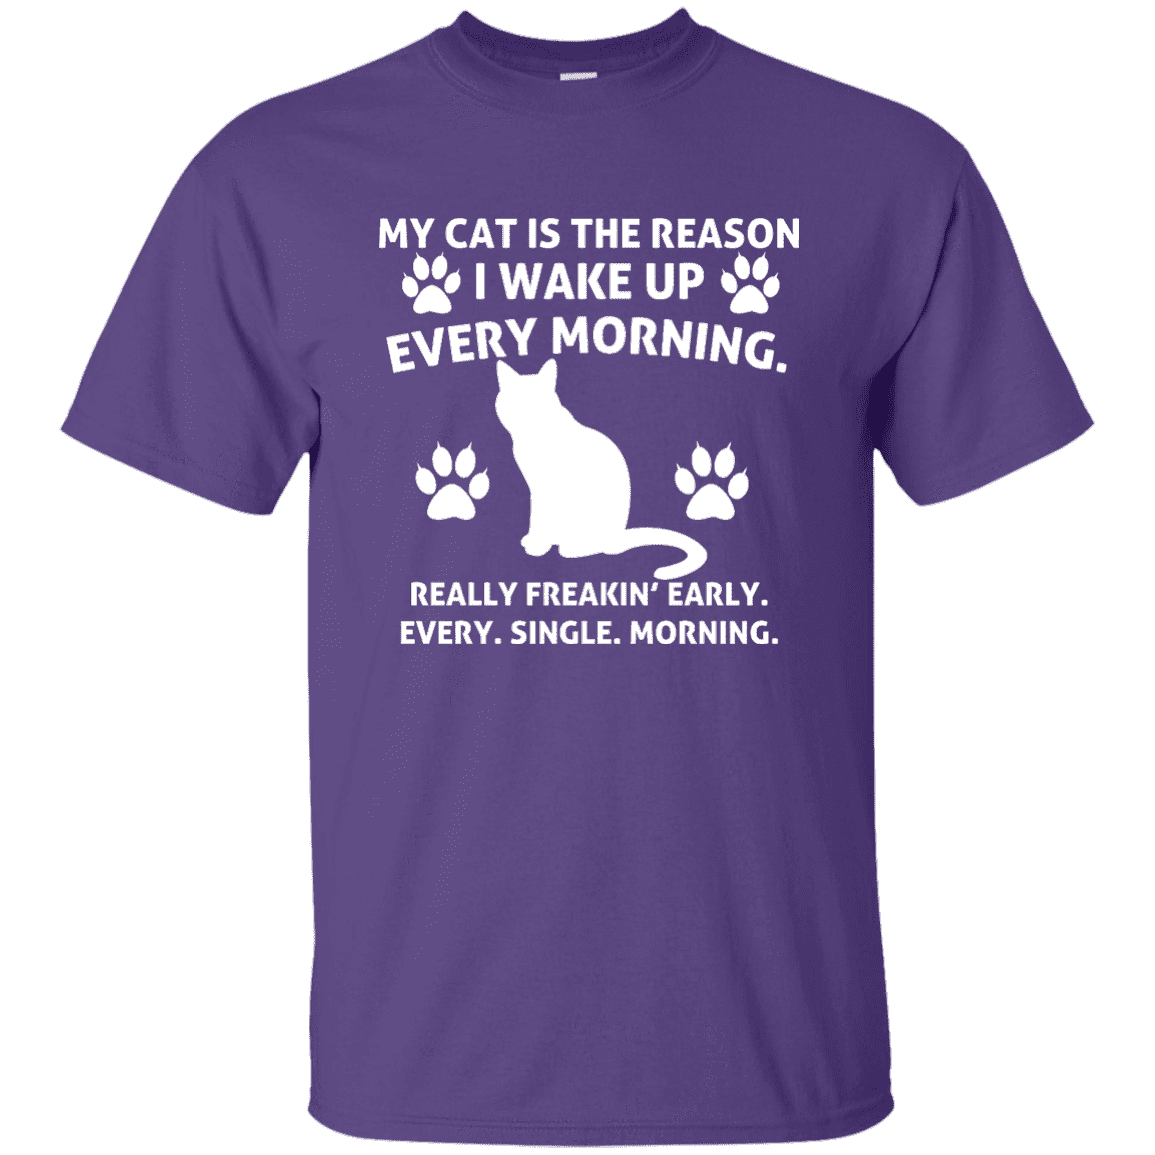 My Cat Is The Reason - T Shirt.